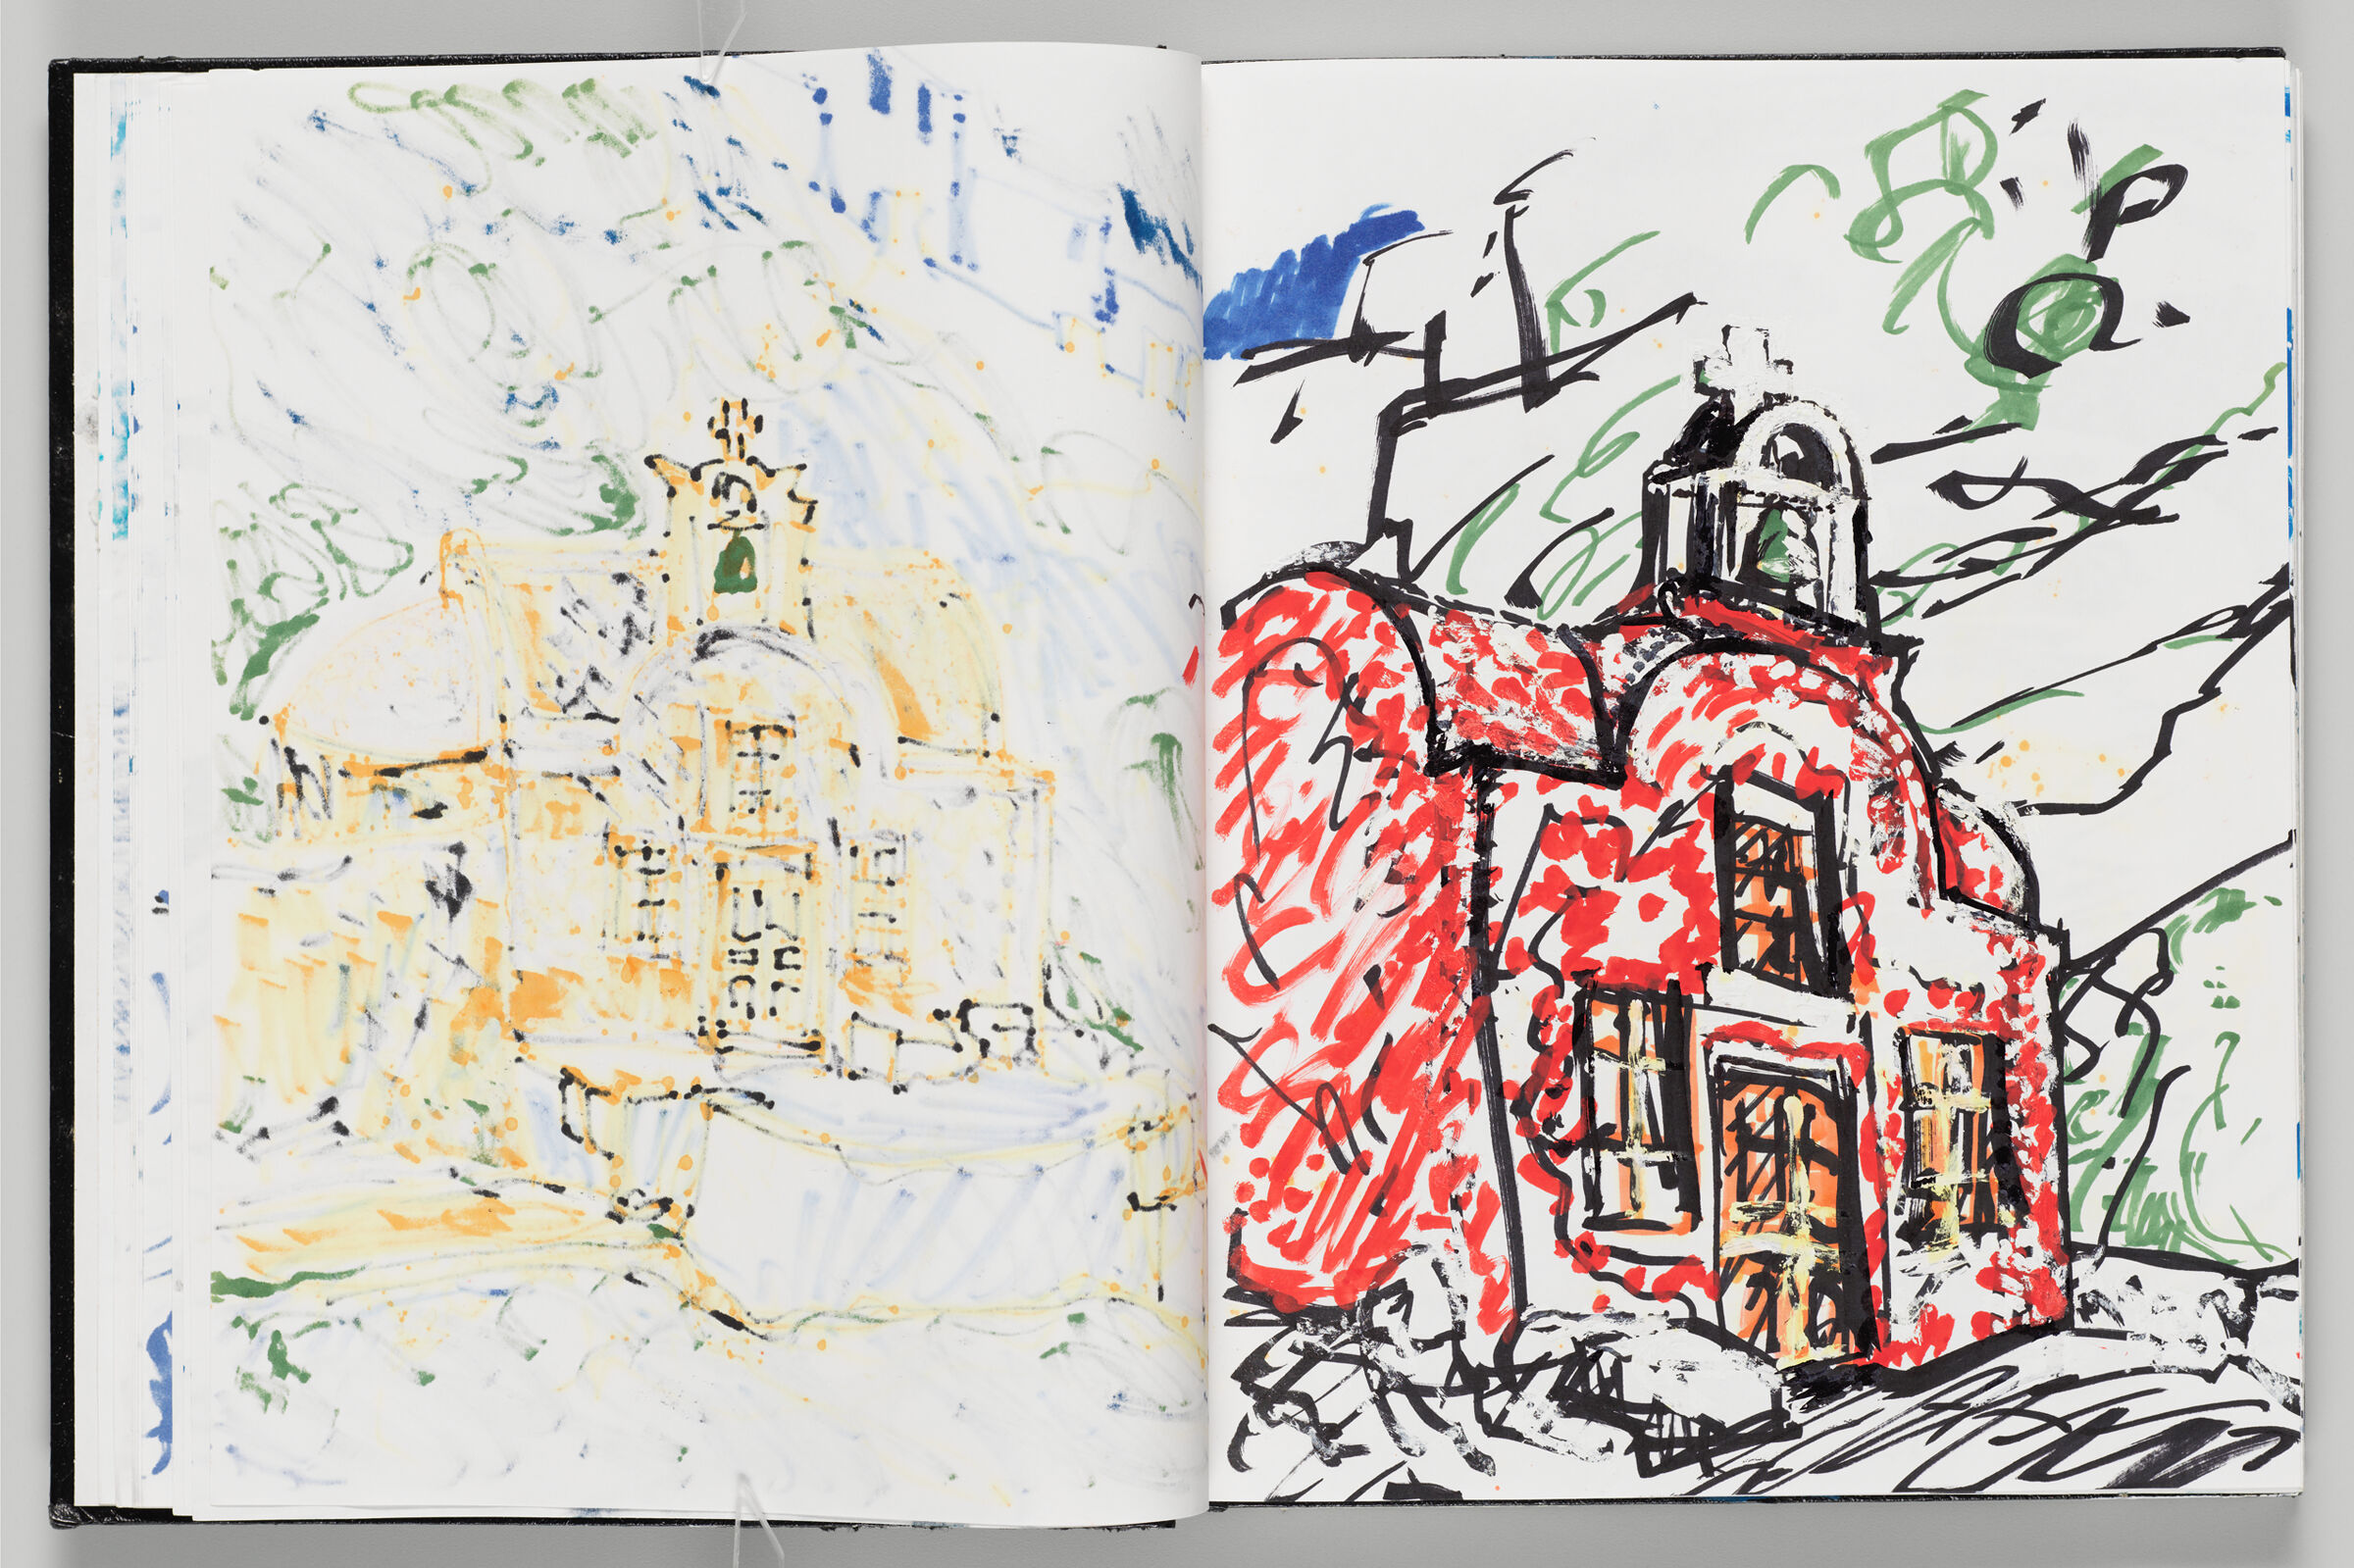 Untitled (Bleed-Through Of Previous Page, Left Page); Untitled (Church In Santorini, Greece, Right Page)